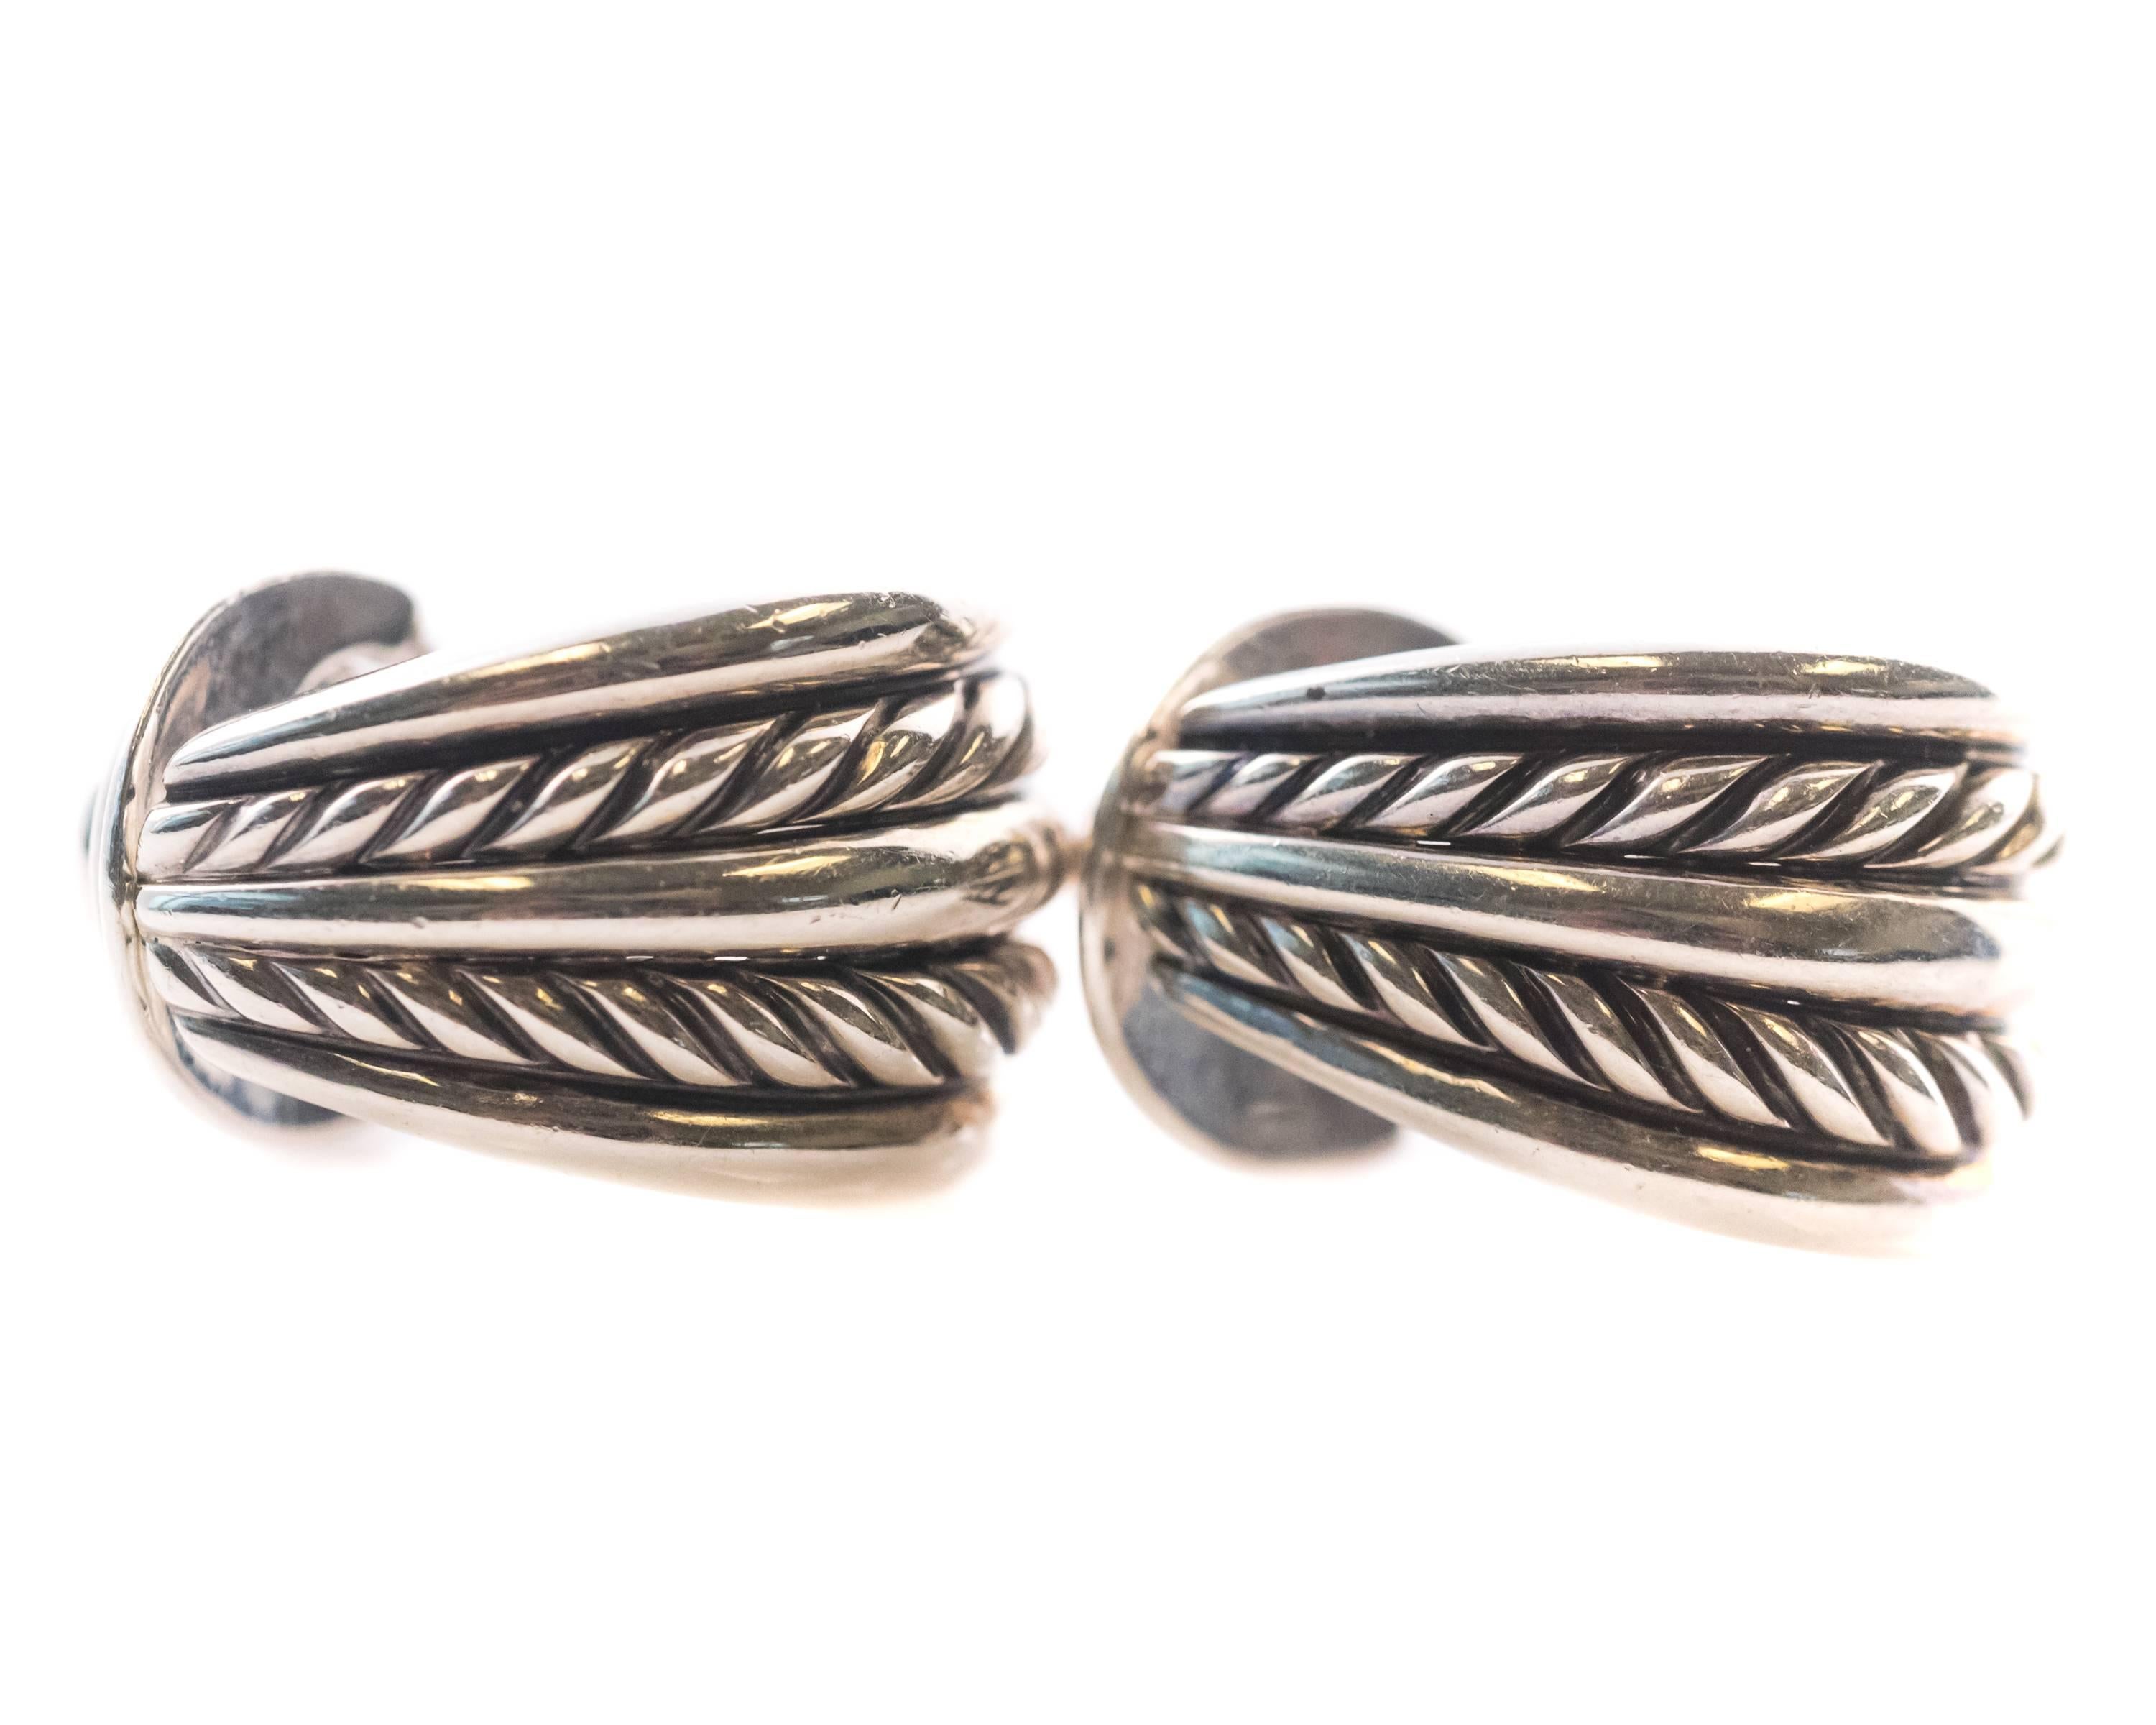 David Yurman Cable Collectibles Sterling Silver Hoop Earrings.

Feature Sterling Silver and double omega hinge backs. 
These everyday classic earrings measure 1.25 inches long x .78 inches wide. They are Hallmarked DY. 

Item Details: 
Measurements: